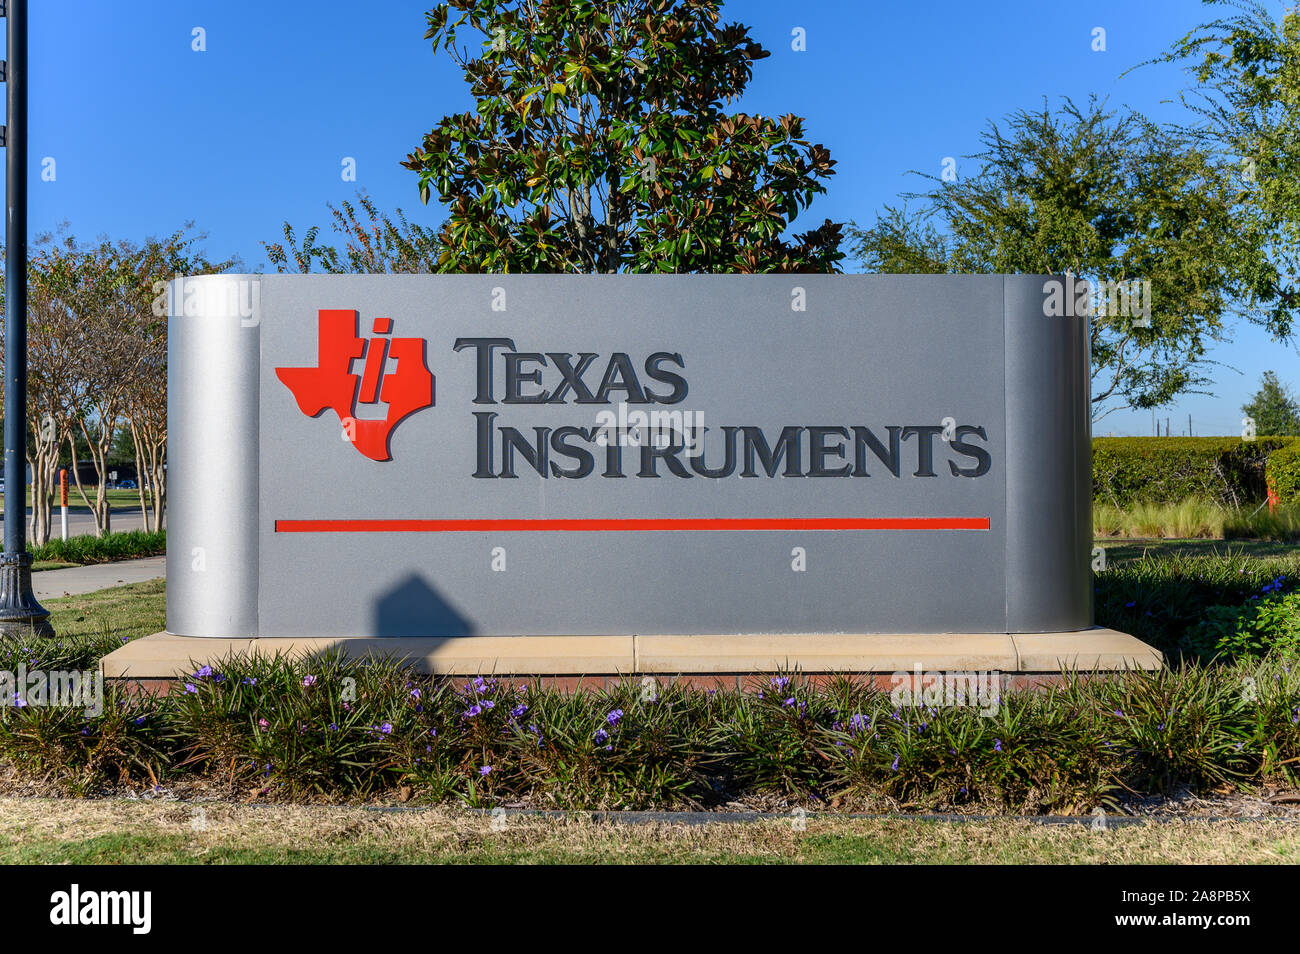 Sugar Land, Texas - Nov 9, 2019: Texas Instruments Sugar Land Facility. TI is an American technology company that designs and manufactures semiconduct Stock Photo